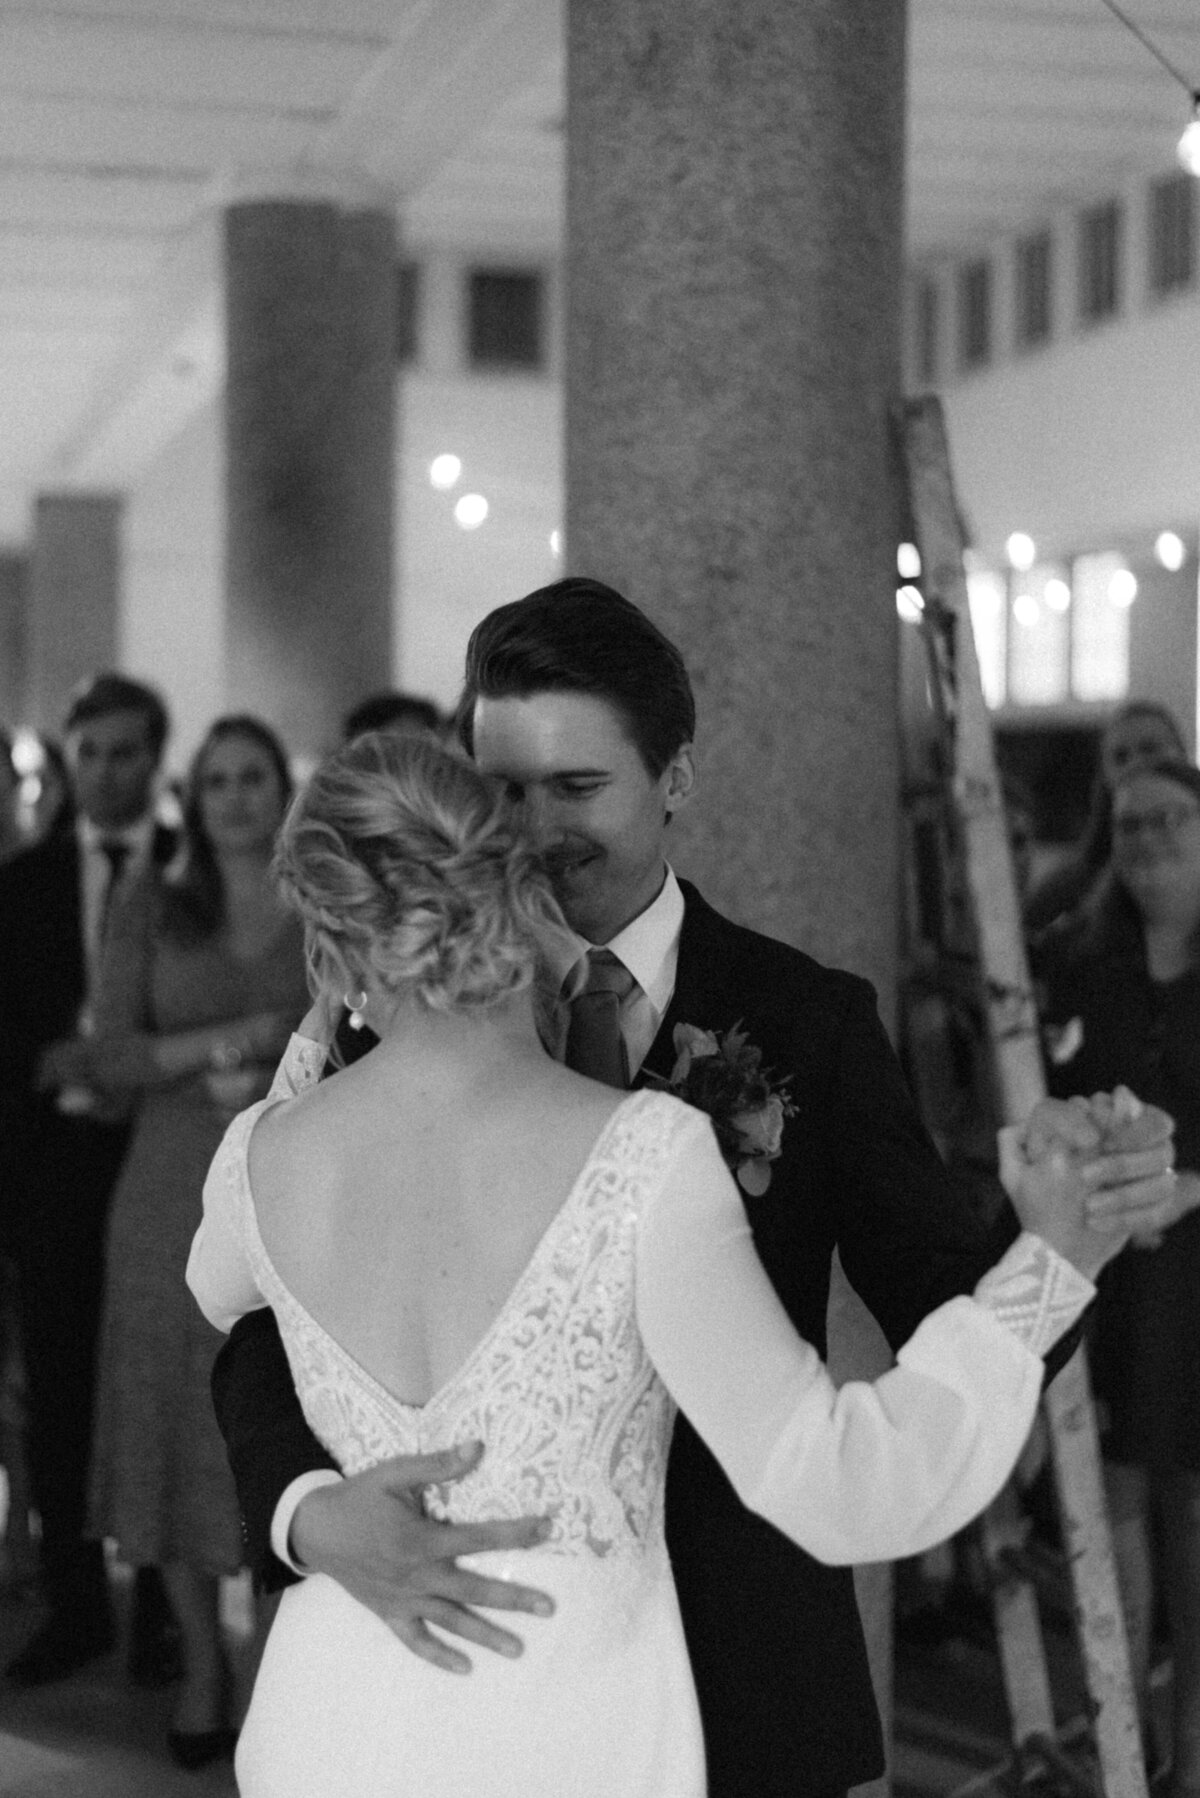 A documentary wedding  photo of  the first dance in Oitbacka gård captured by wedding photographer Hannika Gabrielsson in Finland